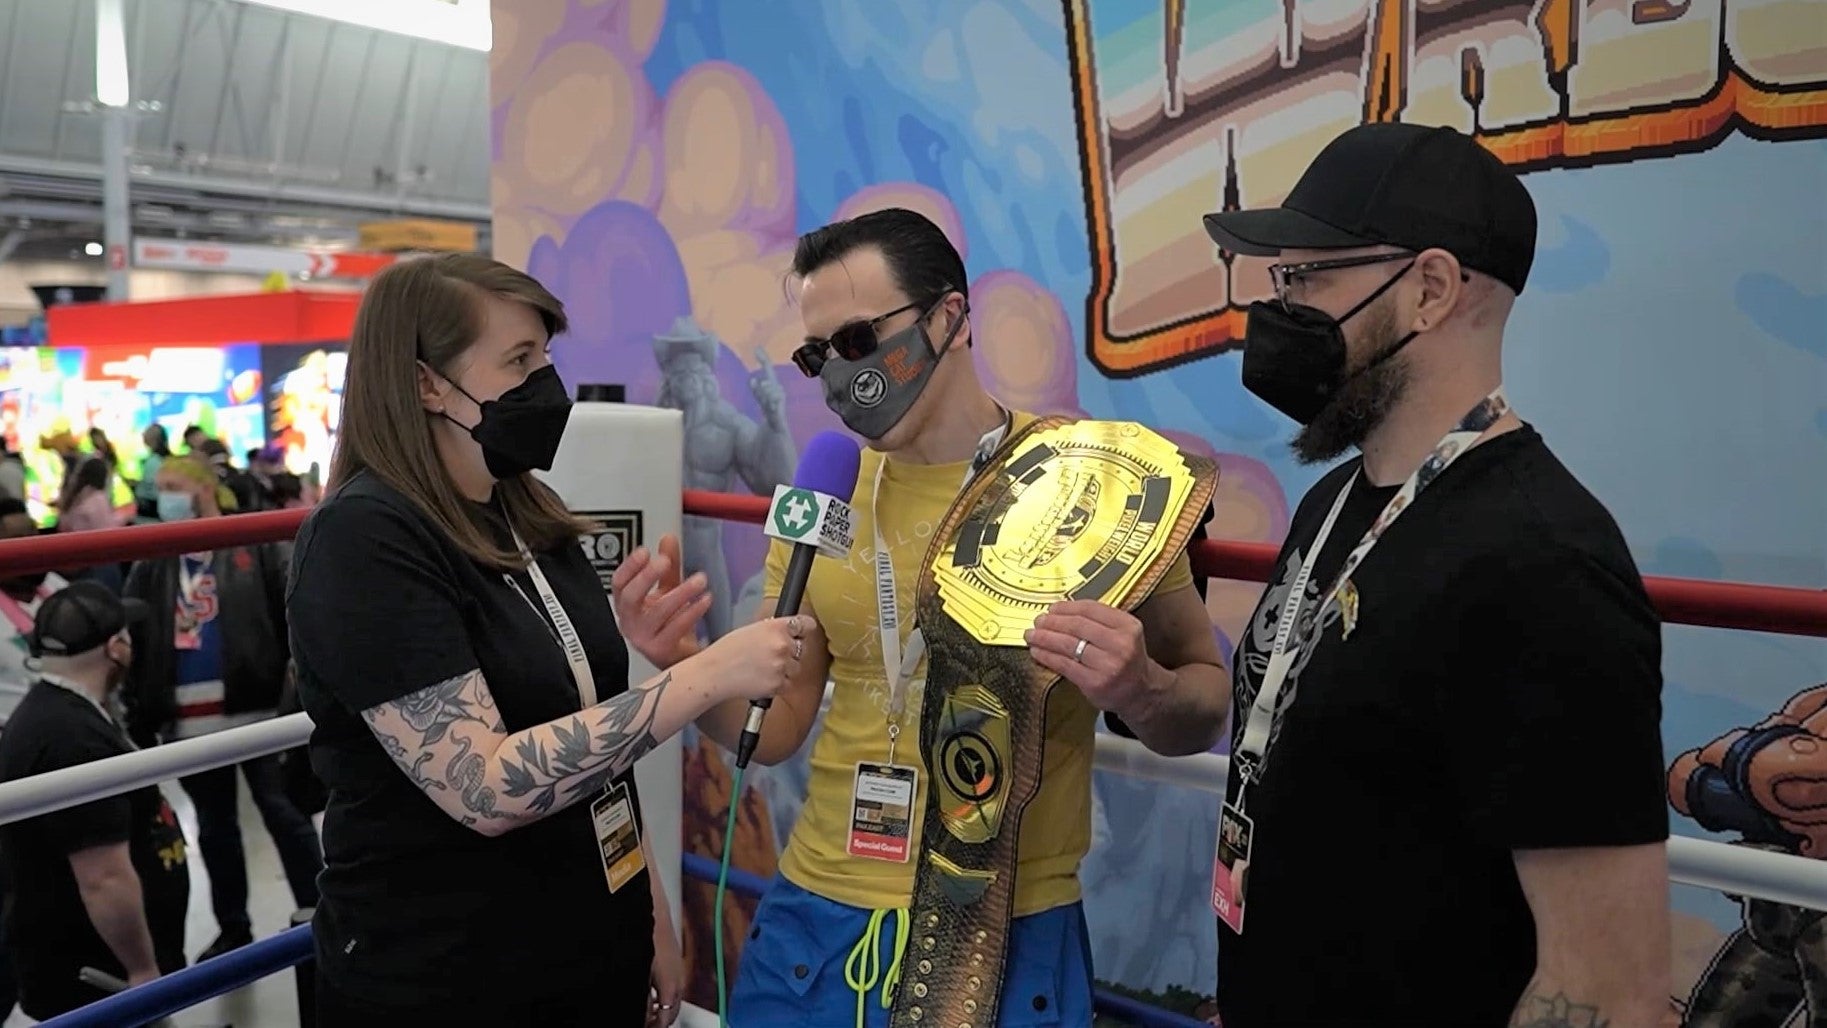 Rachel chats with the developers of WrestleQuest at PAX East